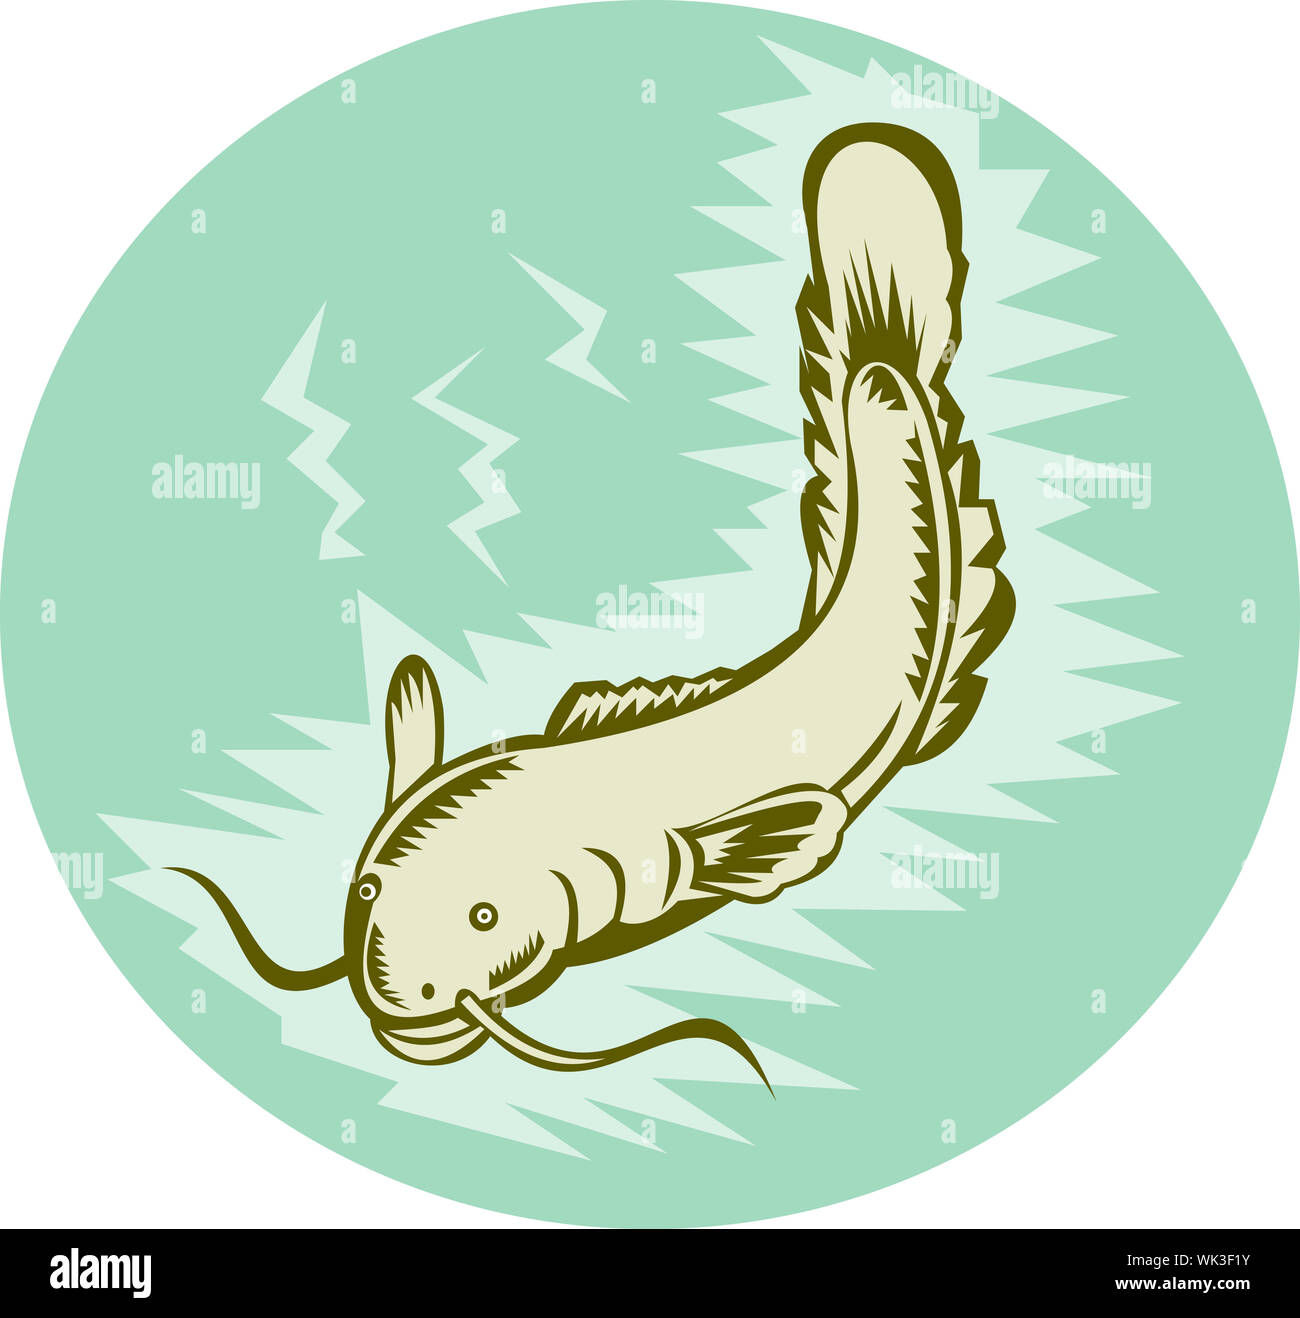 illustration of a Catfish swmiing underwater Stock Photo